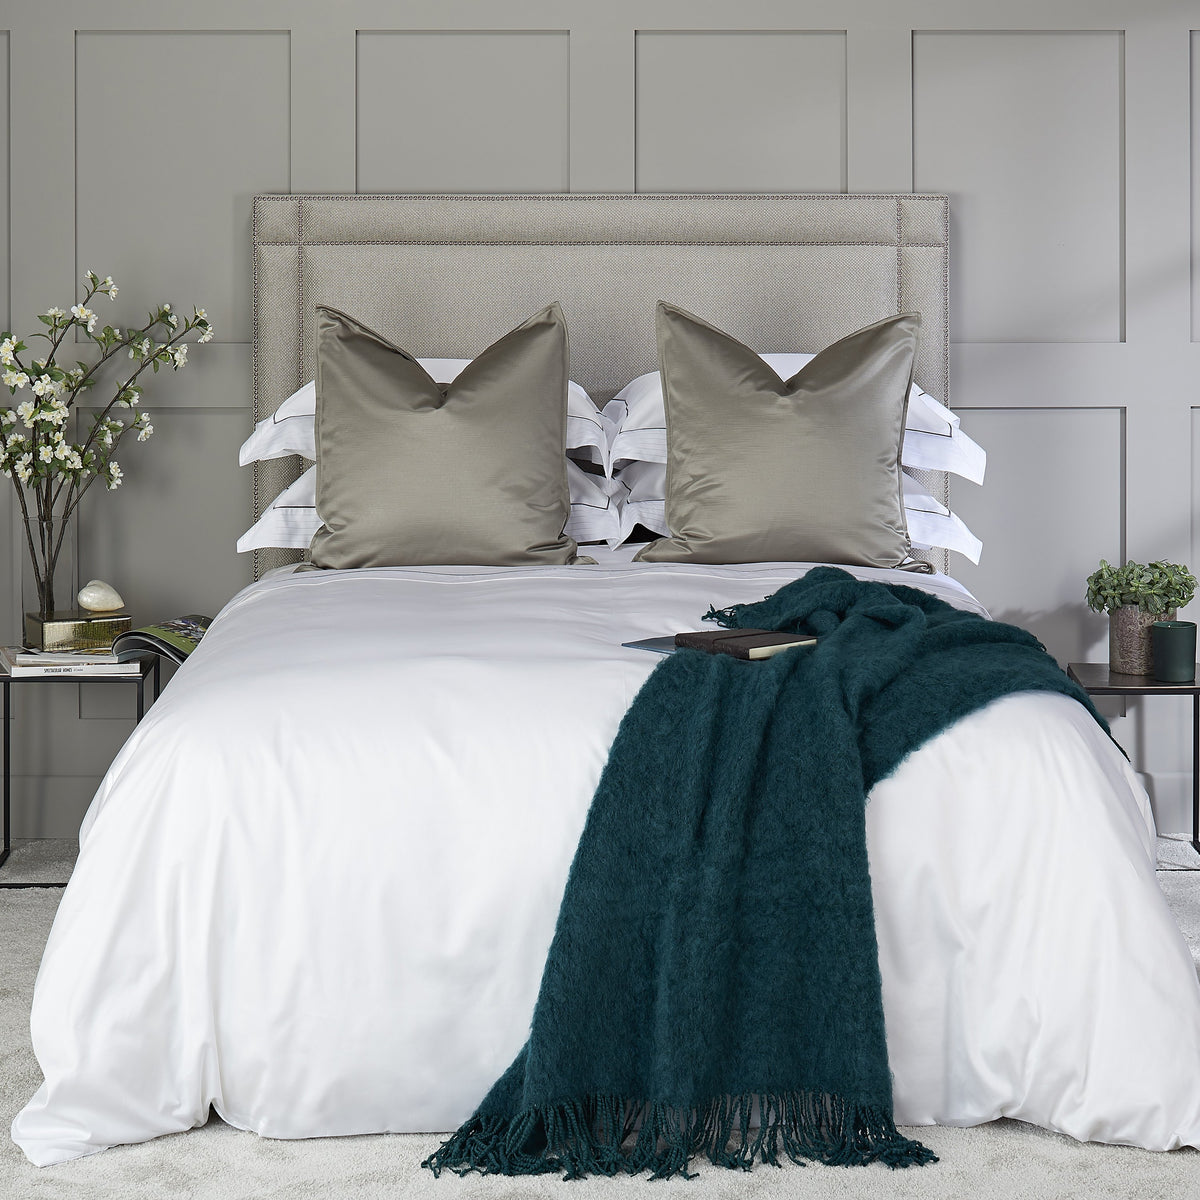 Heirlooms luxurious Sandringham cotton sateen white bedroom sheets set with a contrast border whose subtle self colour woven stitch adds shine to your lines